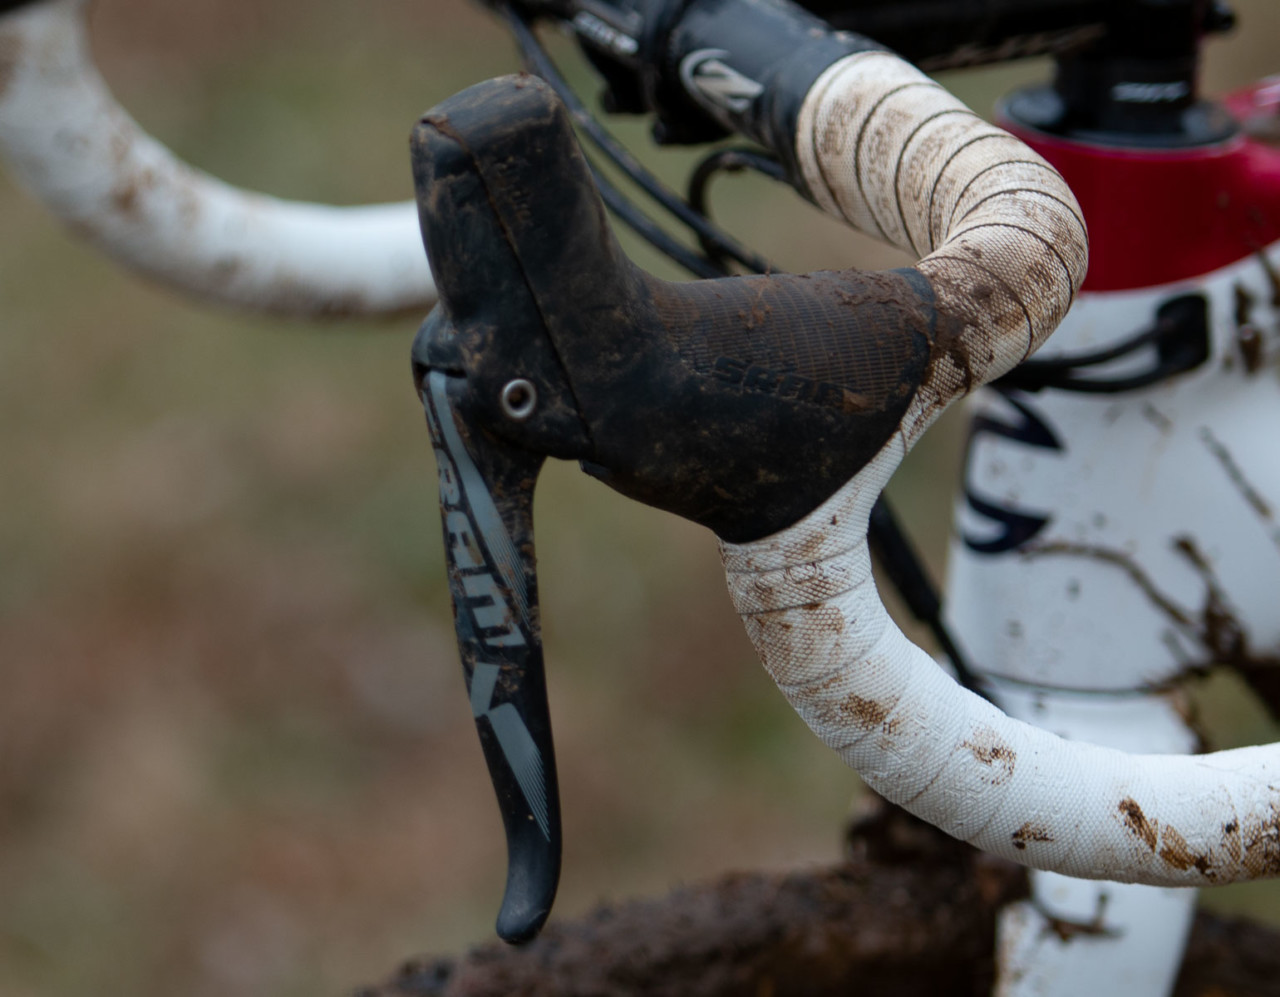 Hyde runs a mechanical SRAM Force 1 groupset with the Force 1 ErgoDynamic Brake Lever on the left. Stephen Hyde's title-winning Cannondale. 2018 Cyclocross National Championships V2. Louisville, KY. © Cyclocross Magazine